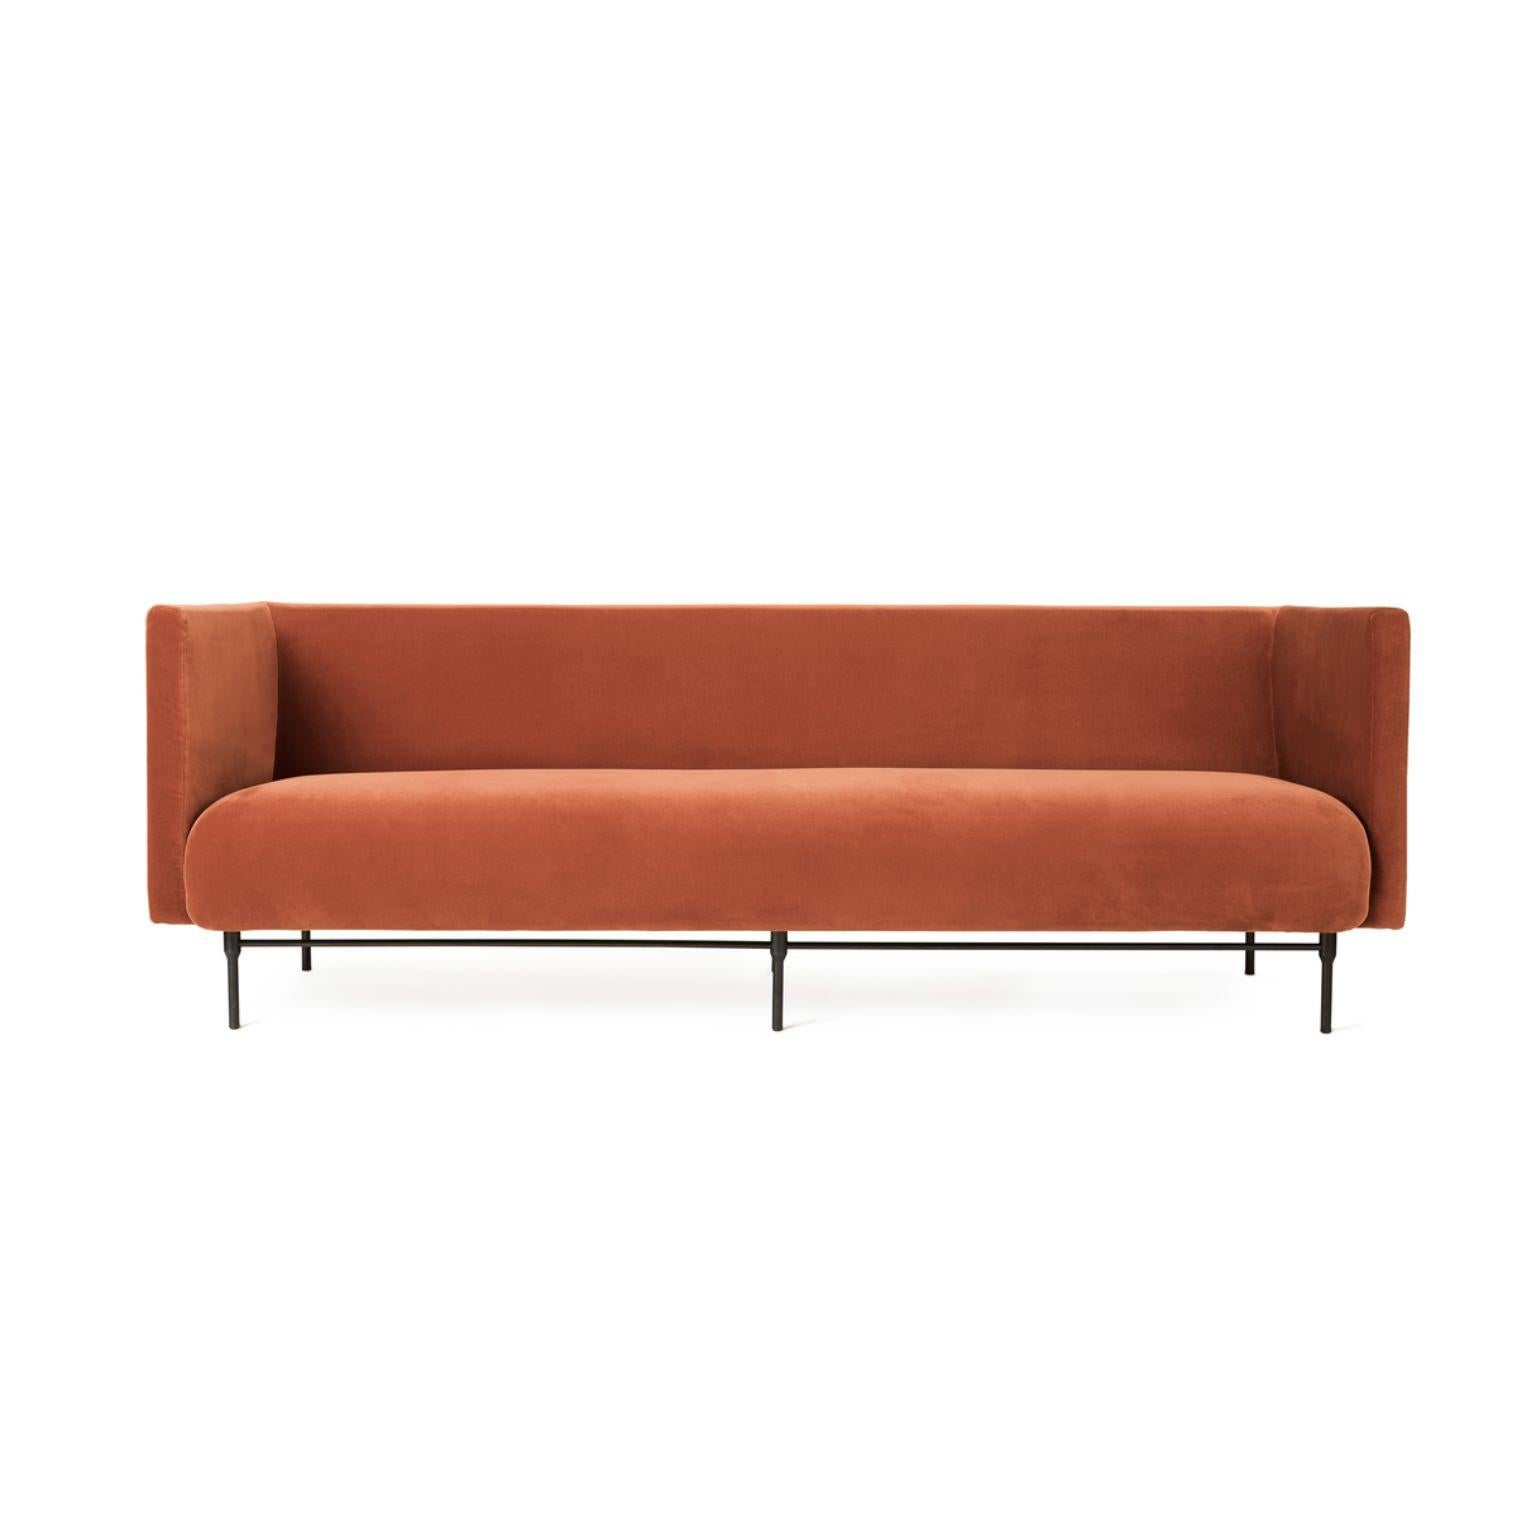 Galore 3 seater Vintage rose by Warm Nordic
Dimensions: D222 x W83 x H 76 cm
Material: Textile upholstery, Powder coated black steel legs, Wooden frame, foam, spring system.
Weight: 62 kg
Also available in different colours and finishes.